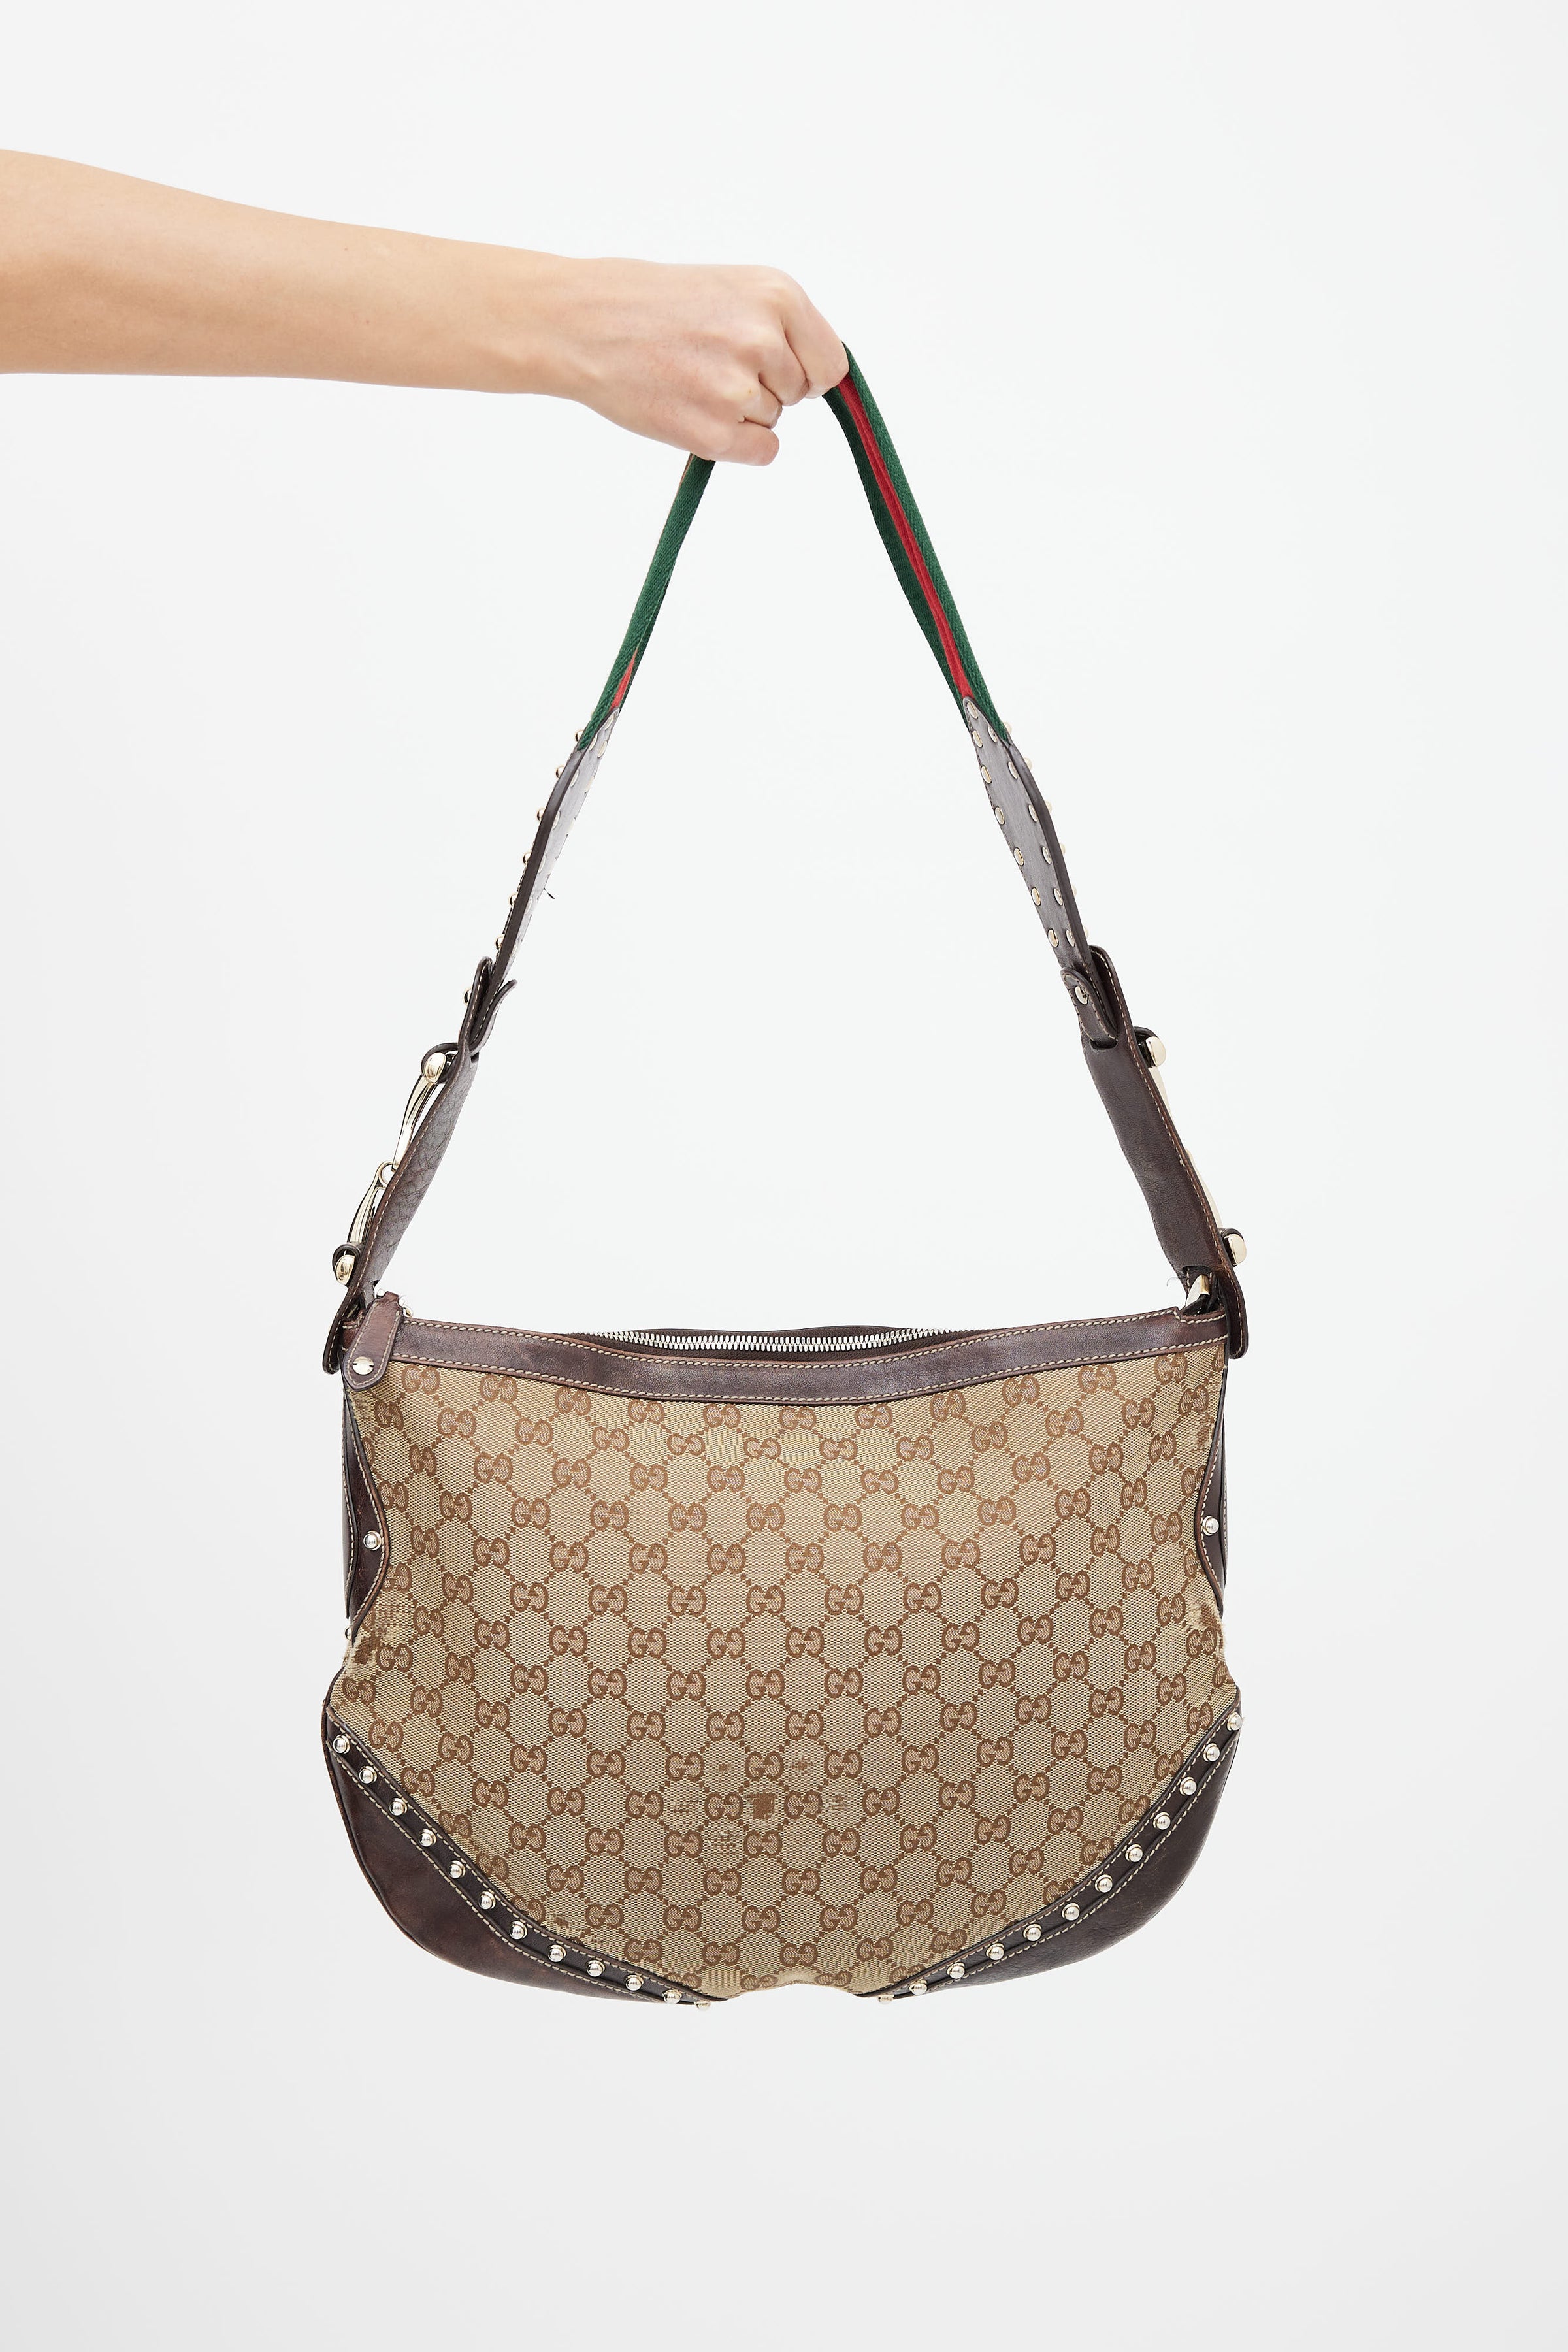 Vintage Gucci Brown Monogram Canvas Hobo With Leather Handle and